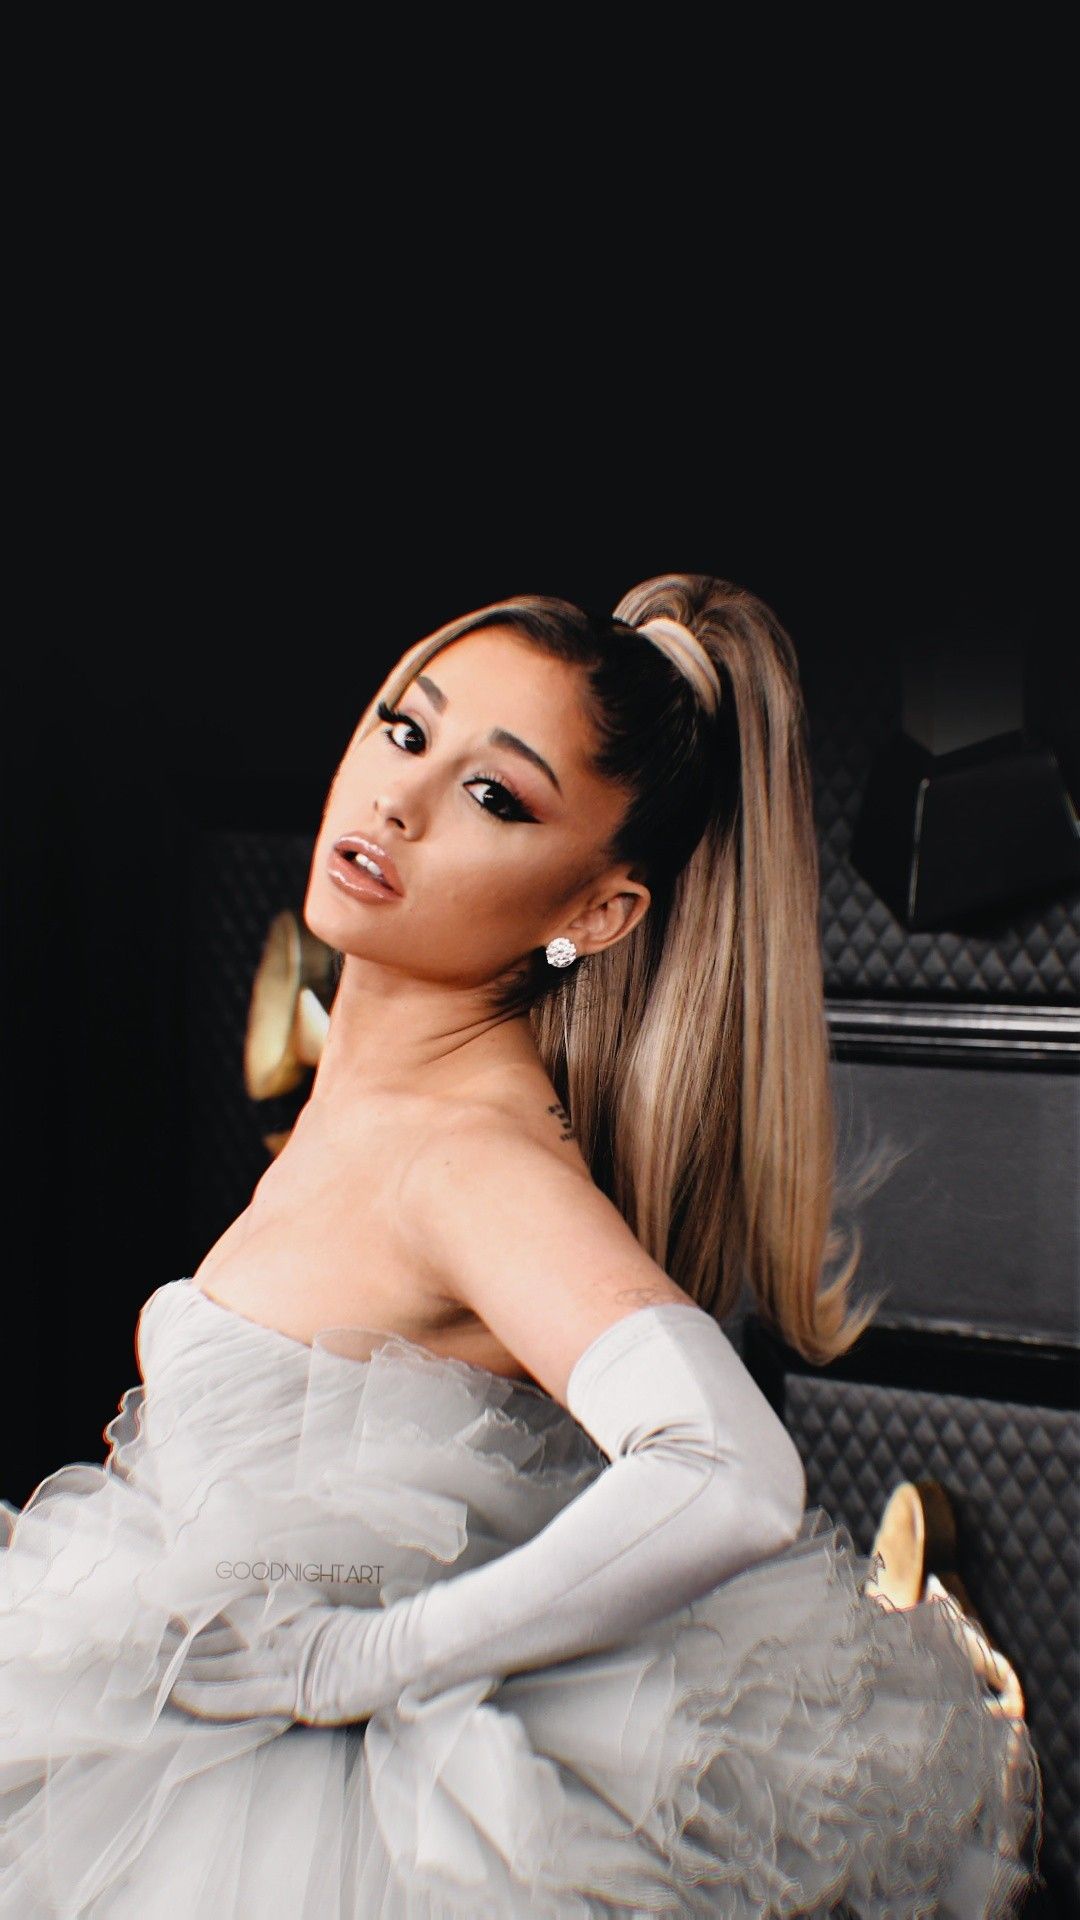 Ariana Grande New 2020 Wallpapers